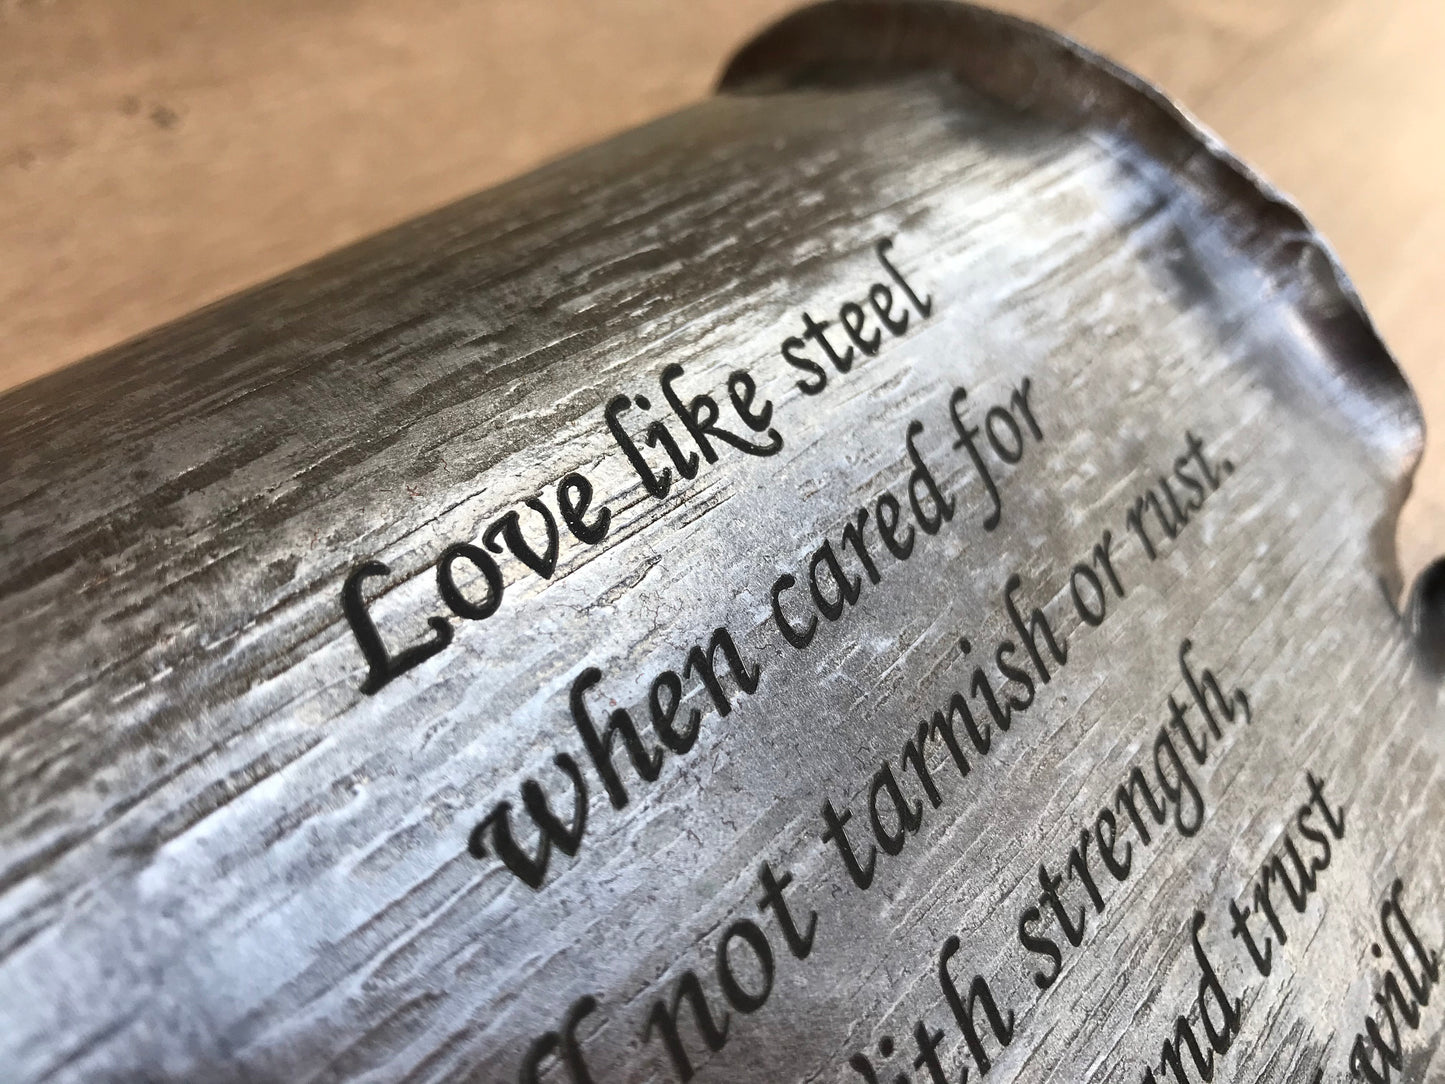 Steel scroll, 11th anniversary, steel anniversary gift, 11 year anniversary,wedding anniversary,partner gifts,steel gift for him,steel gifts